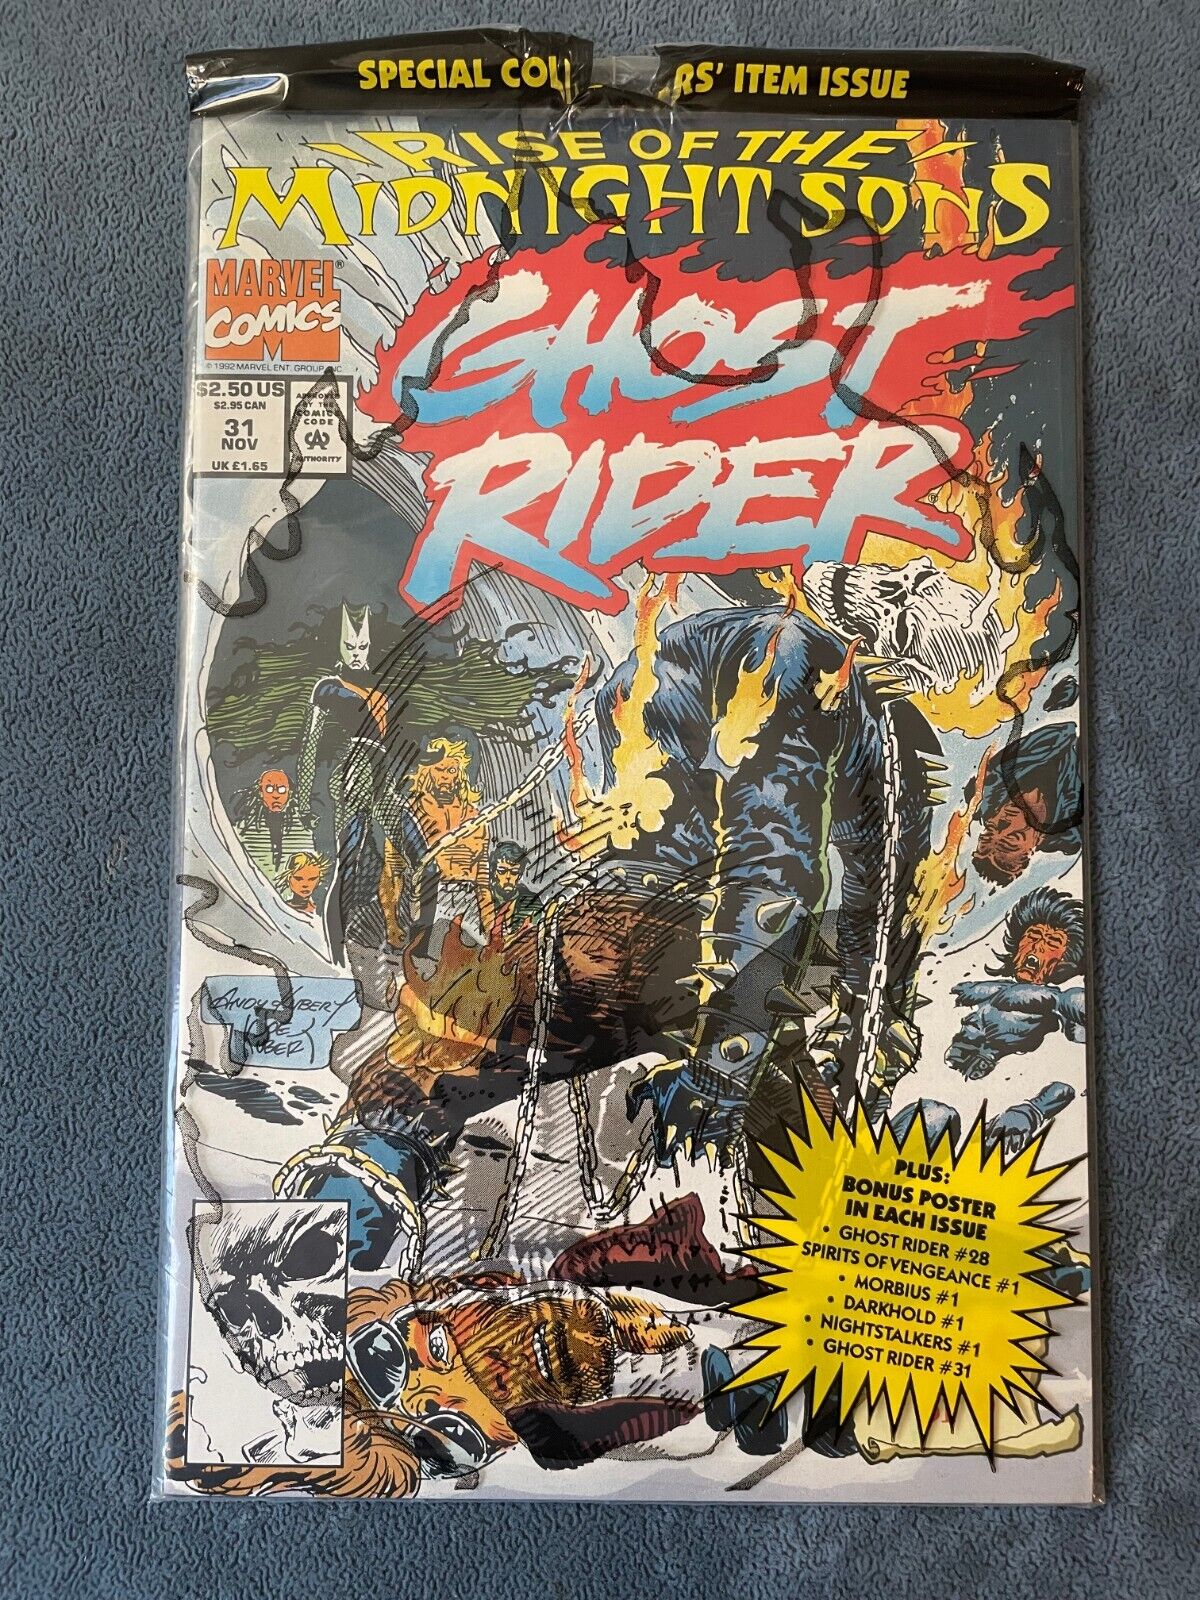 Ghost Rider #31 1992 Marvel Comic Book Open Polybagged Midnight Sons VF+